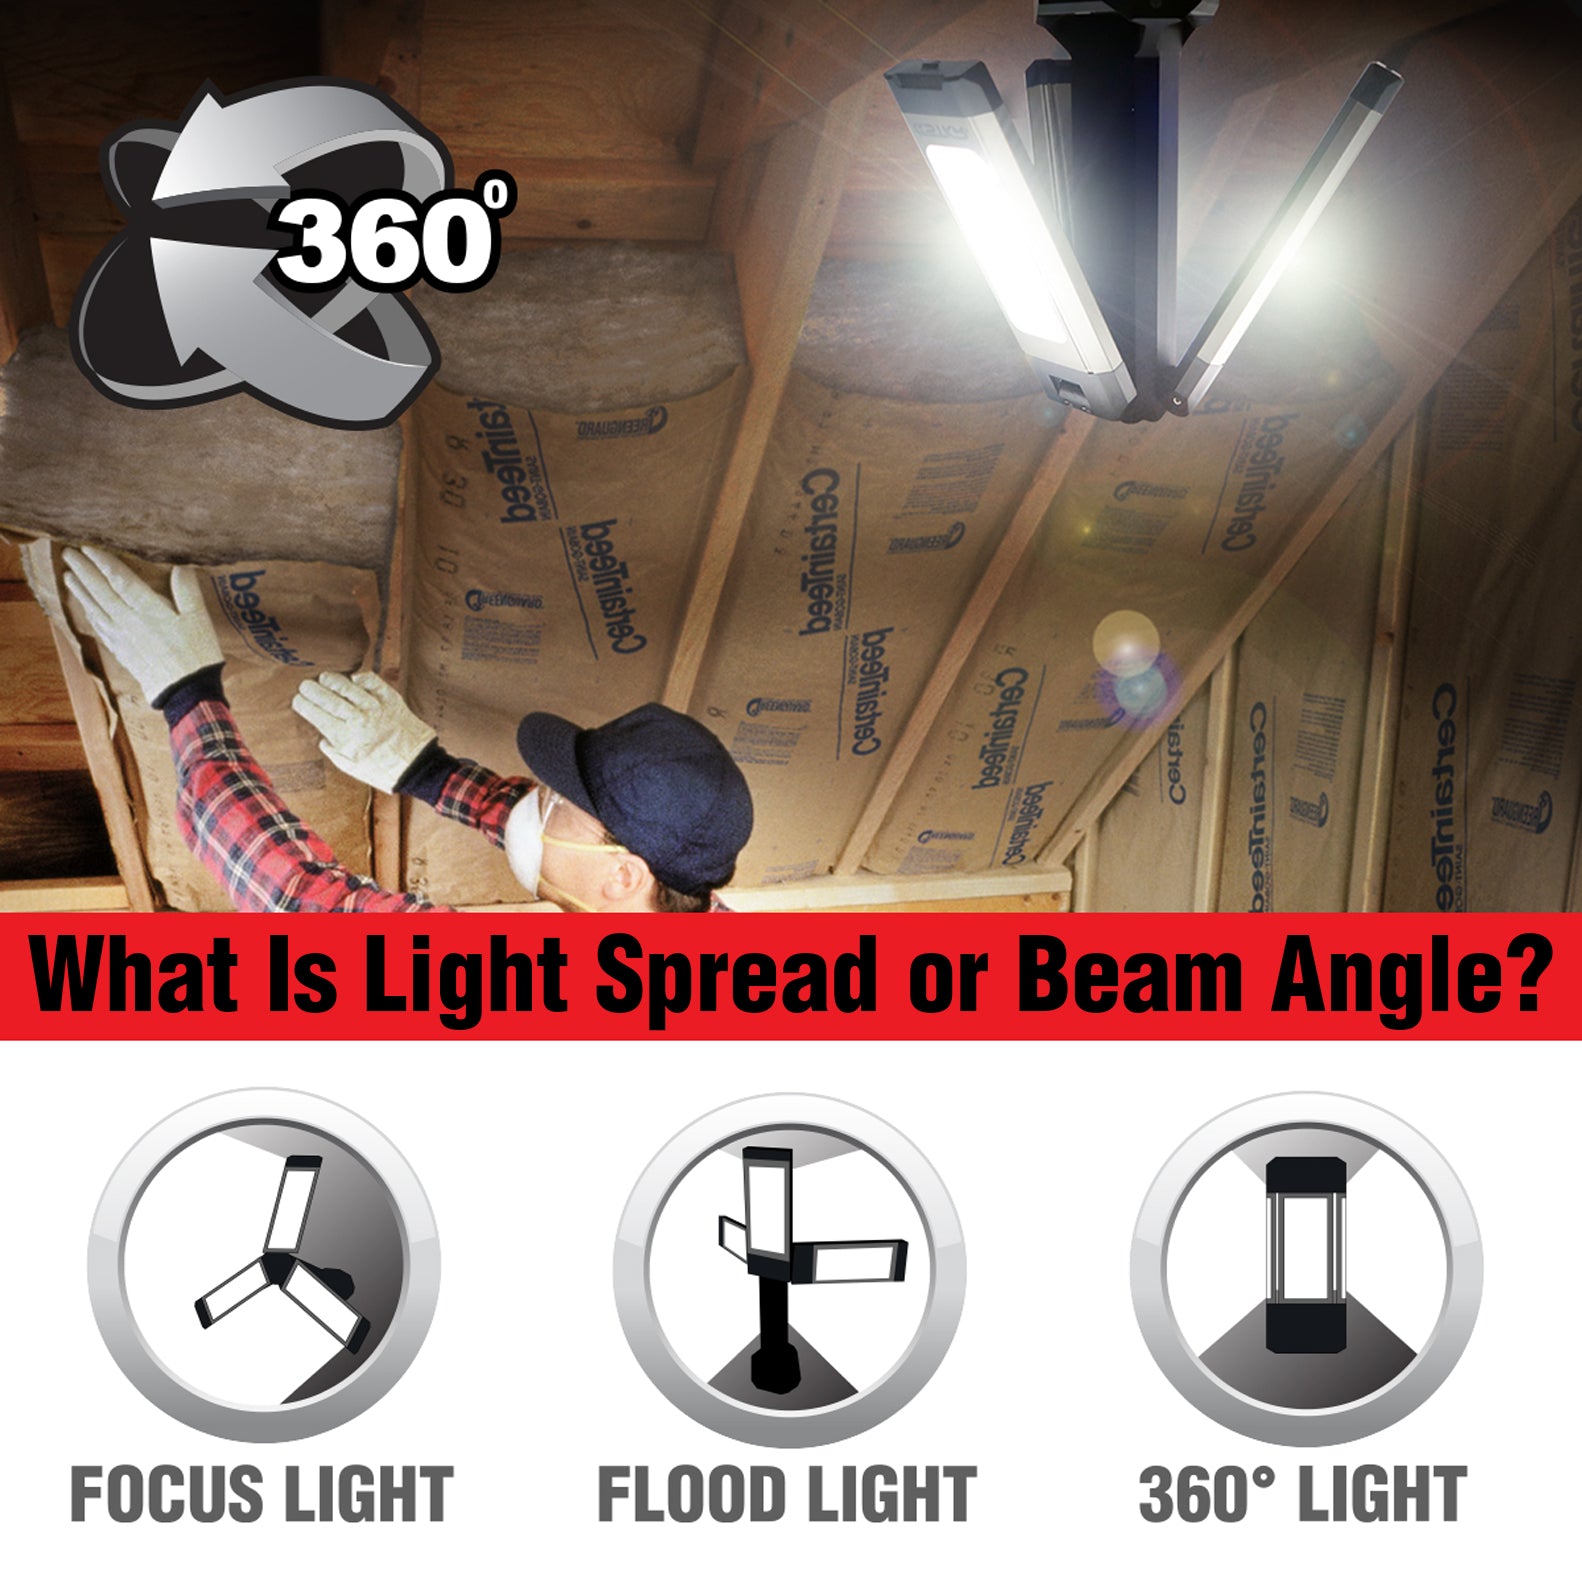 What Is Light Spread or Beam Angle? Spot, Flood, and Area